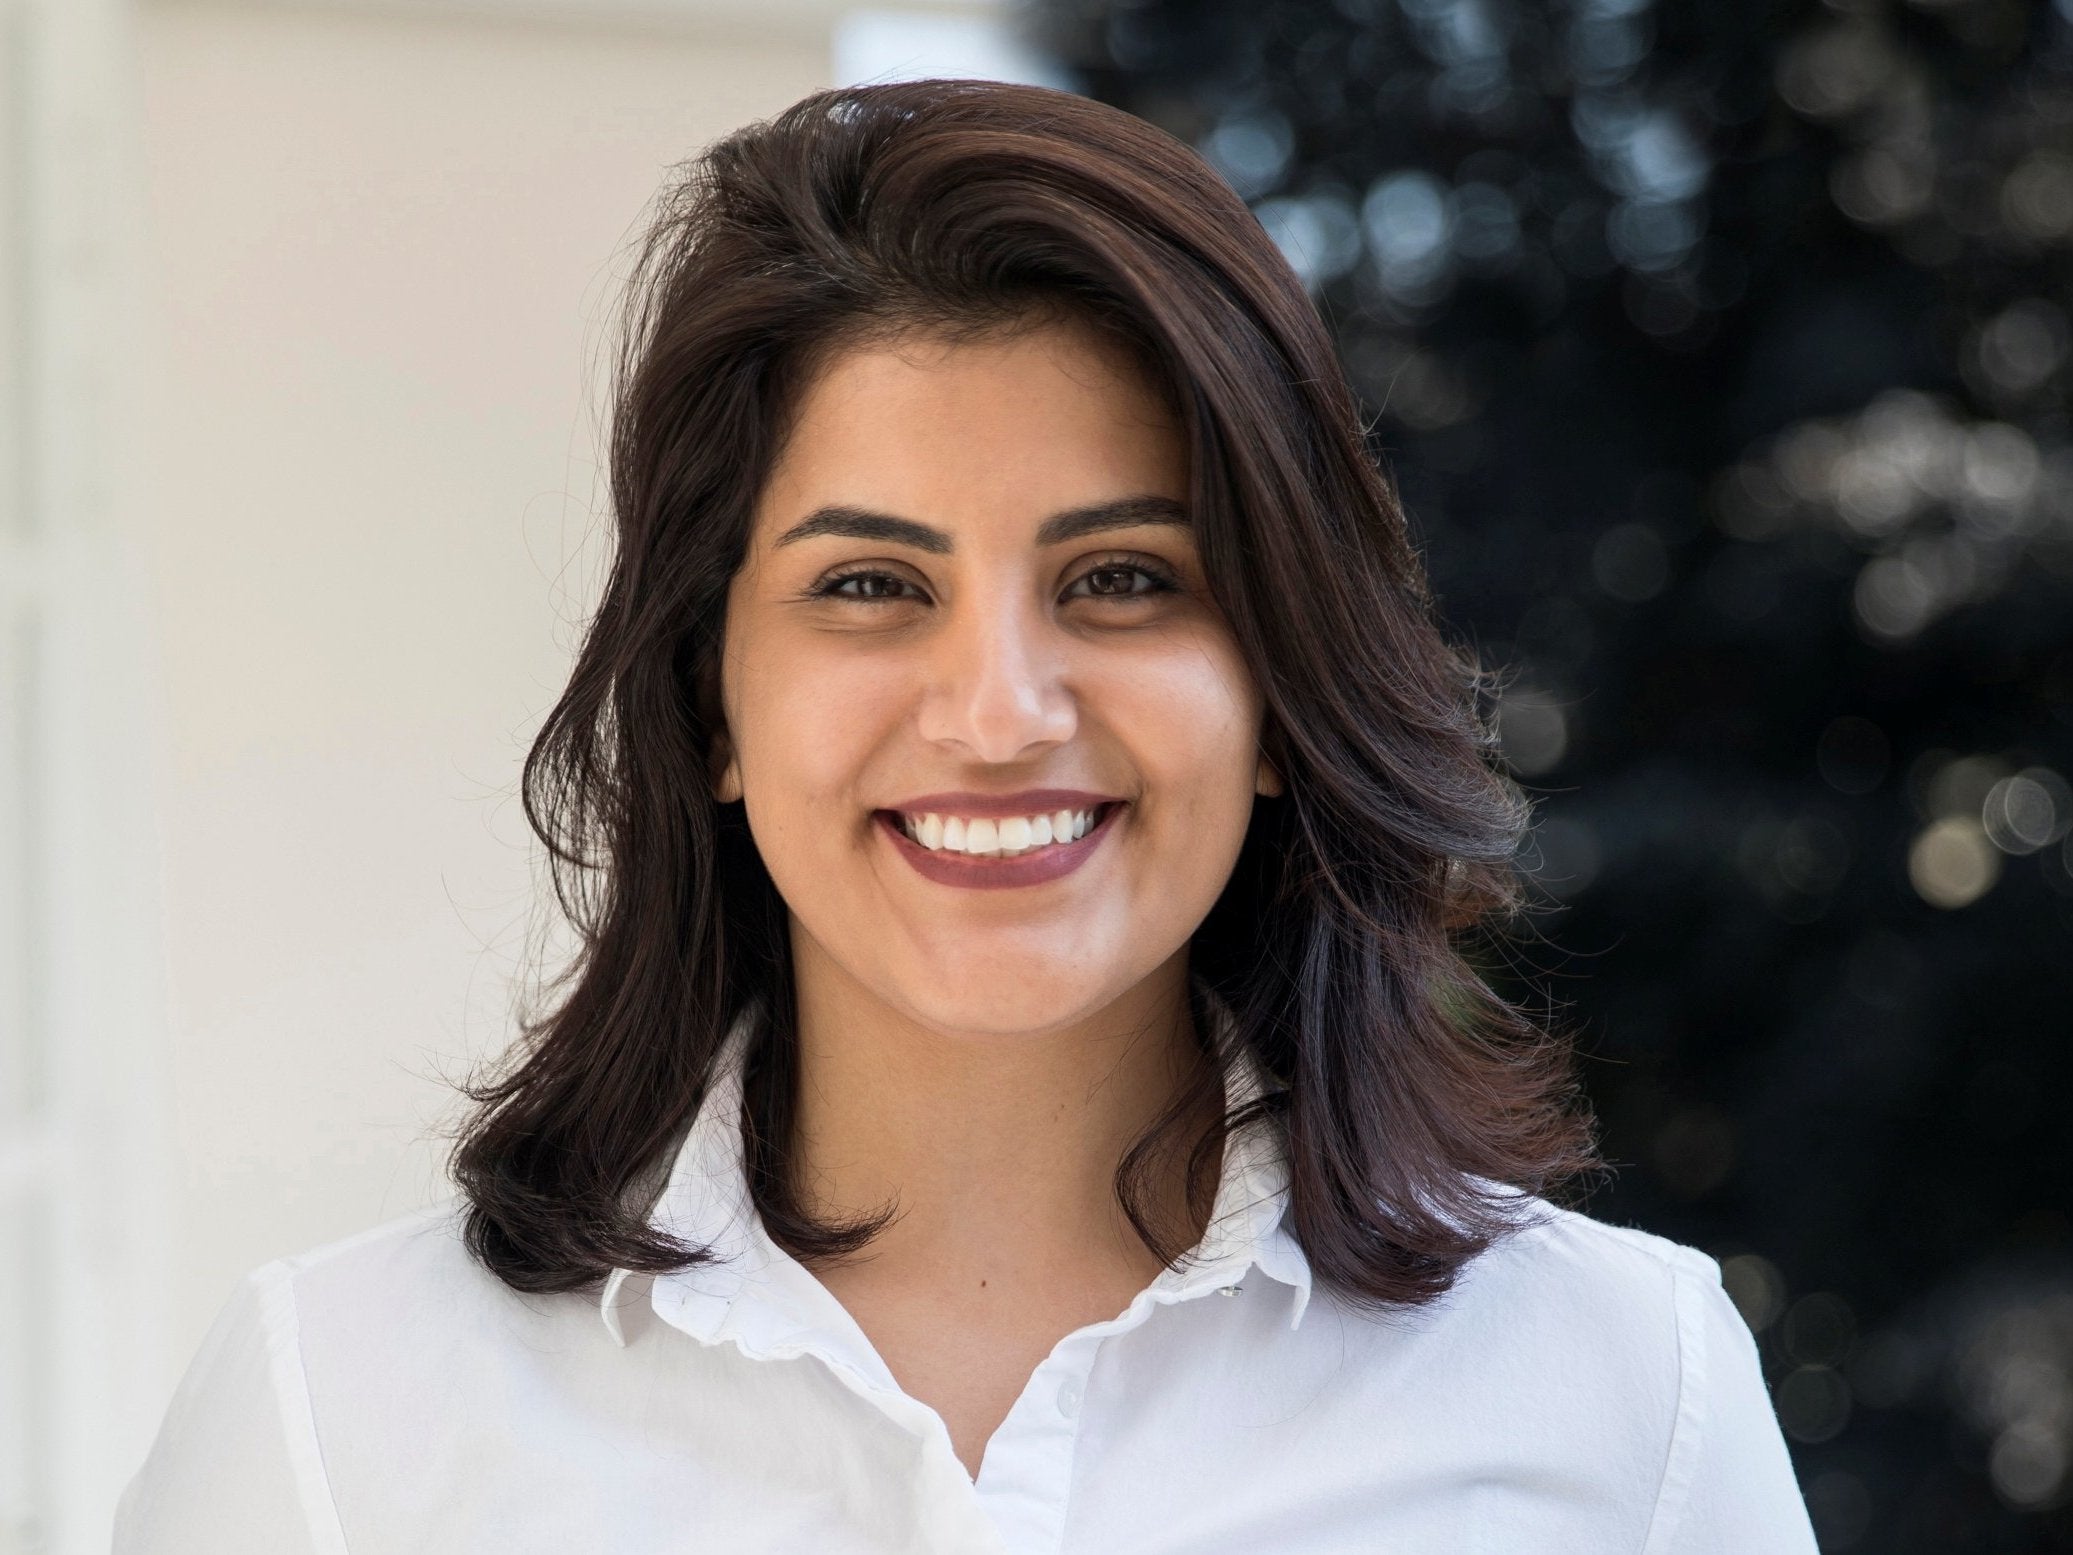 Loujain al-Hathloul successfully campaigned to win Saudi women the right to drive